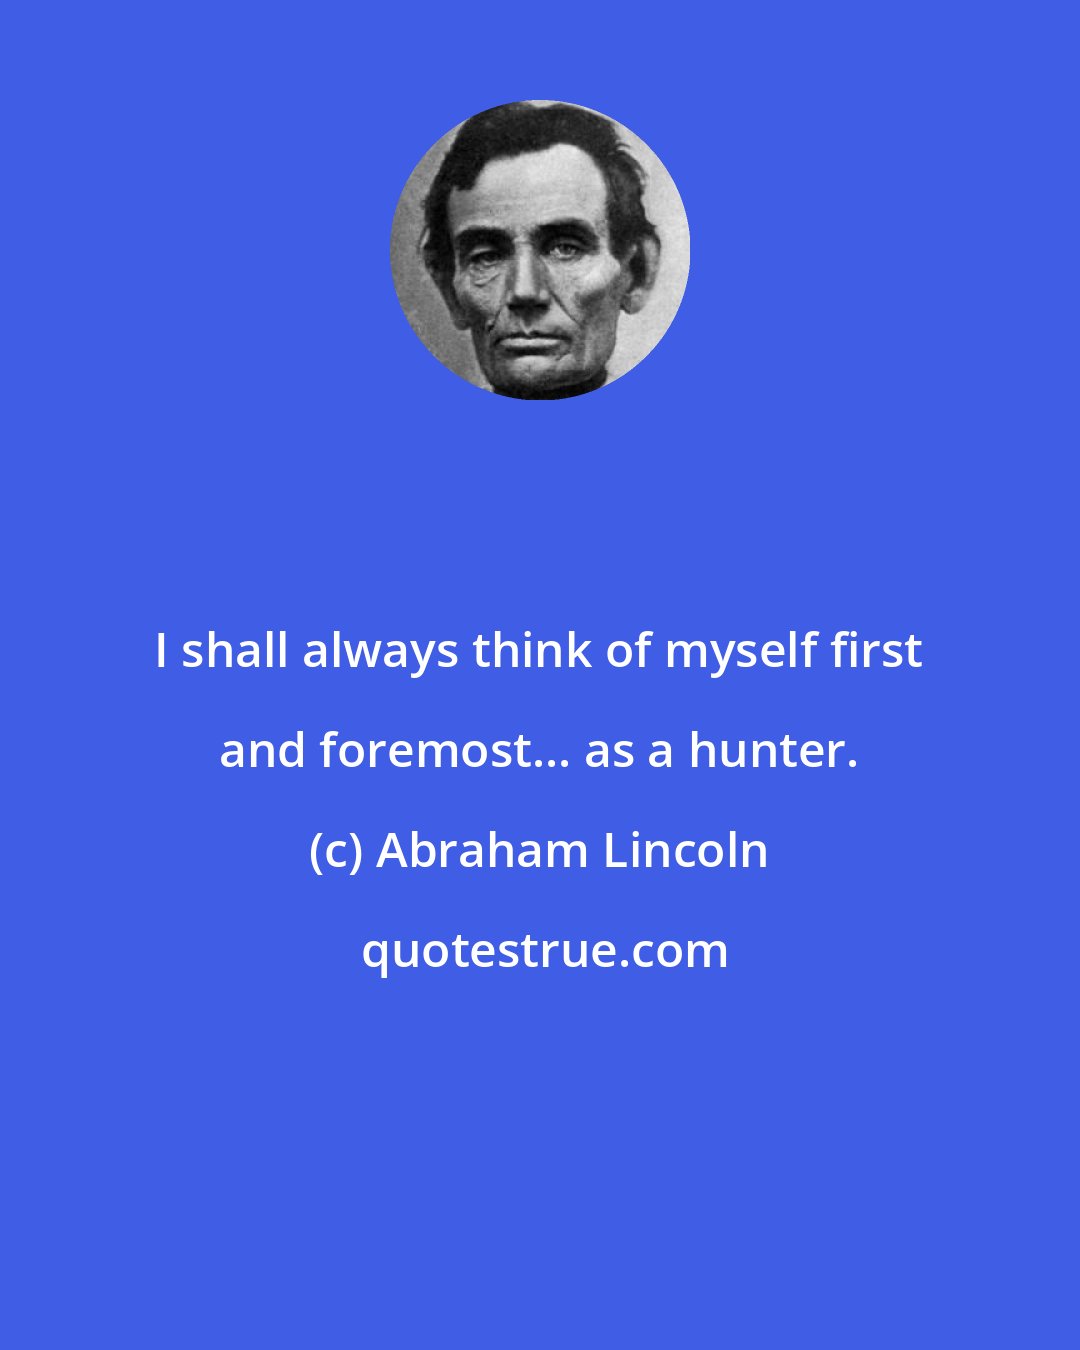 Abraham Lincoln: I shall always think of myself first and foremost... as a hunter.